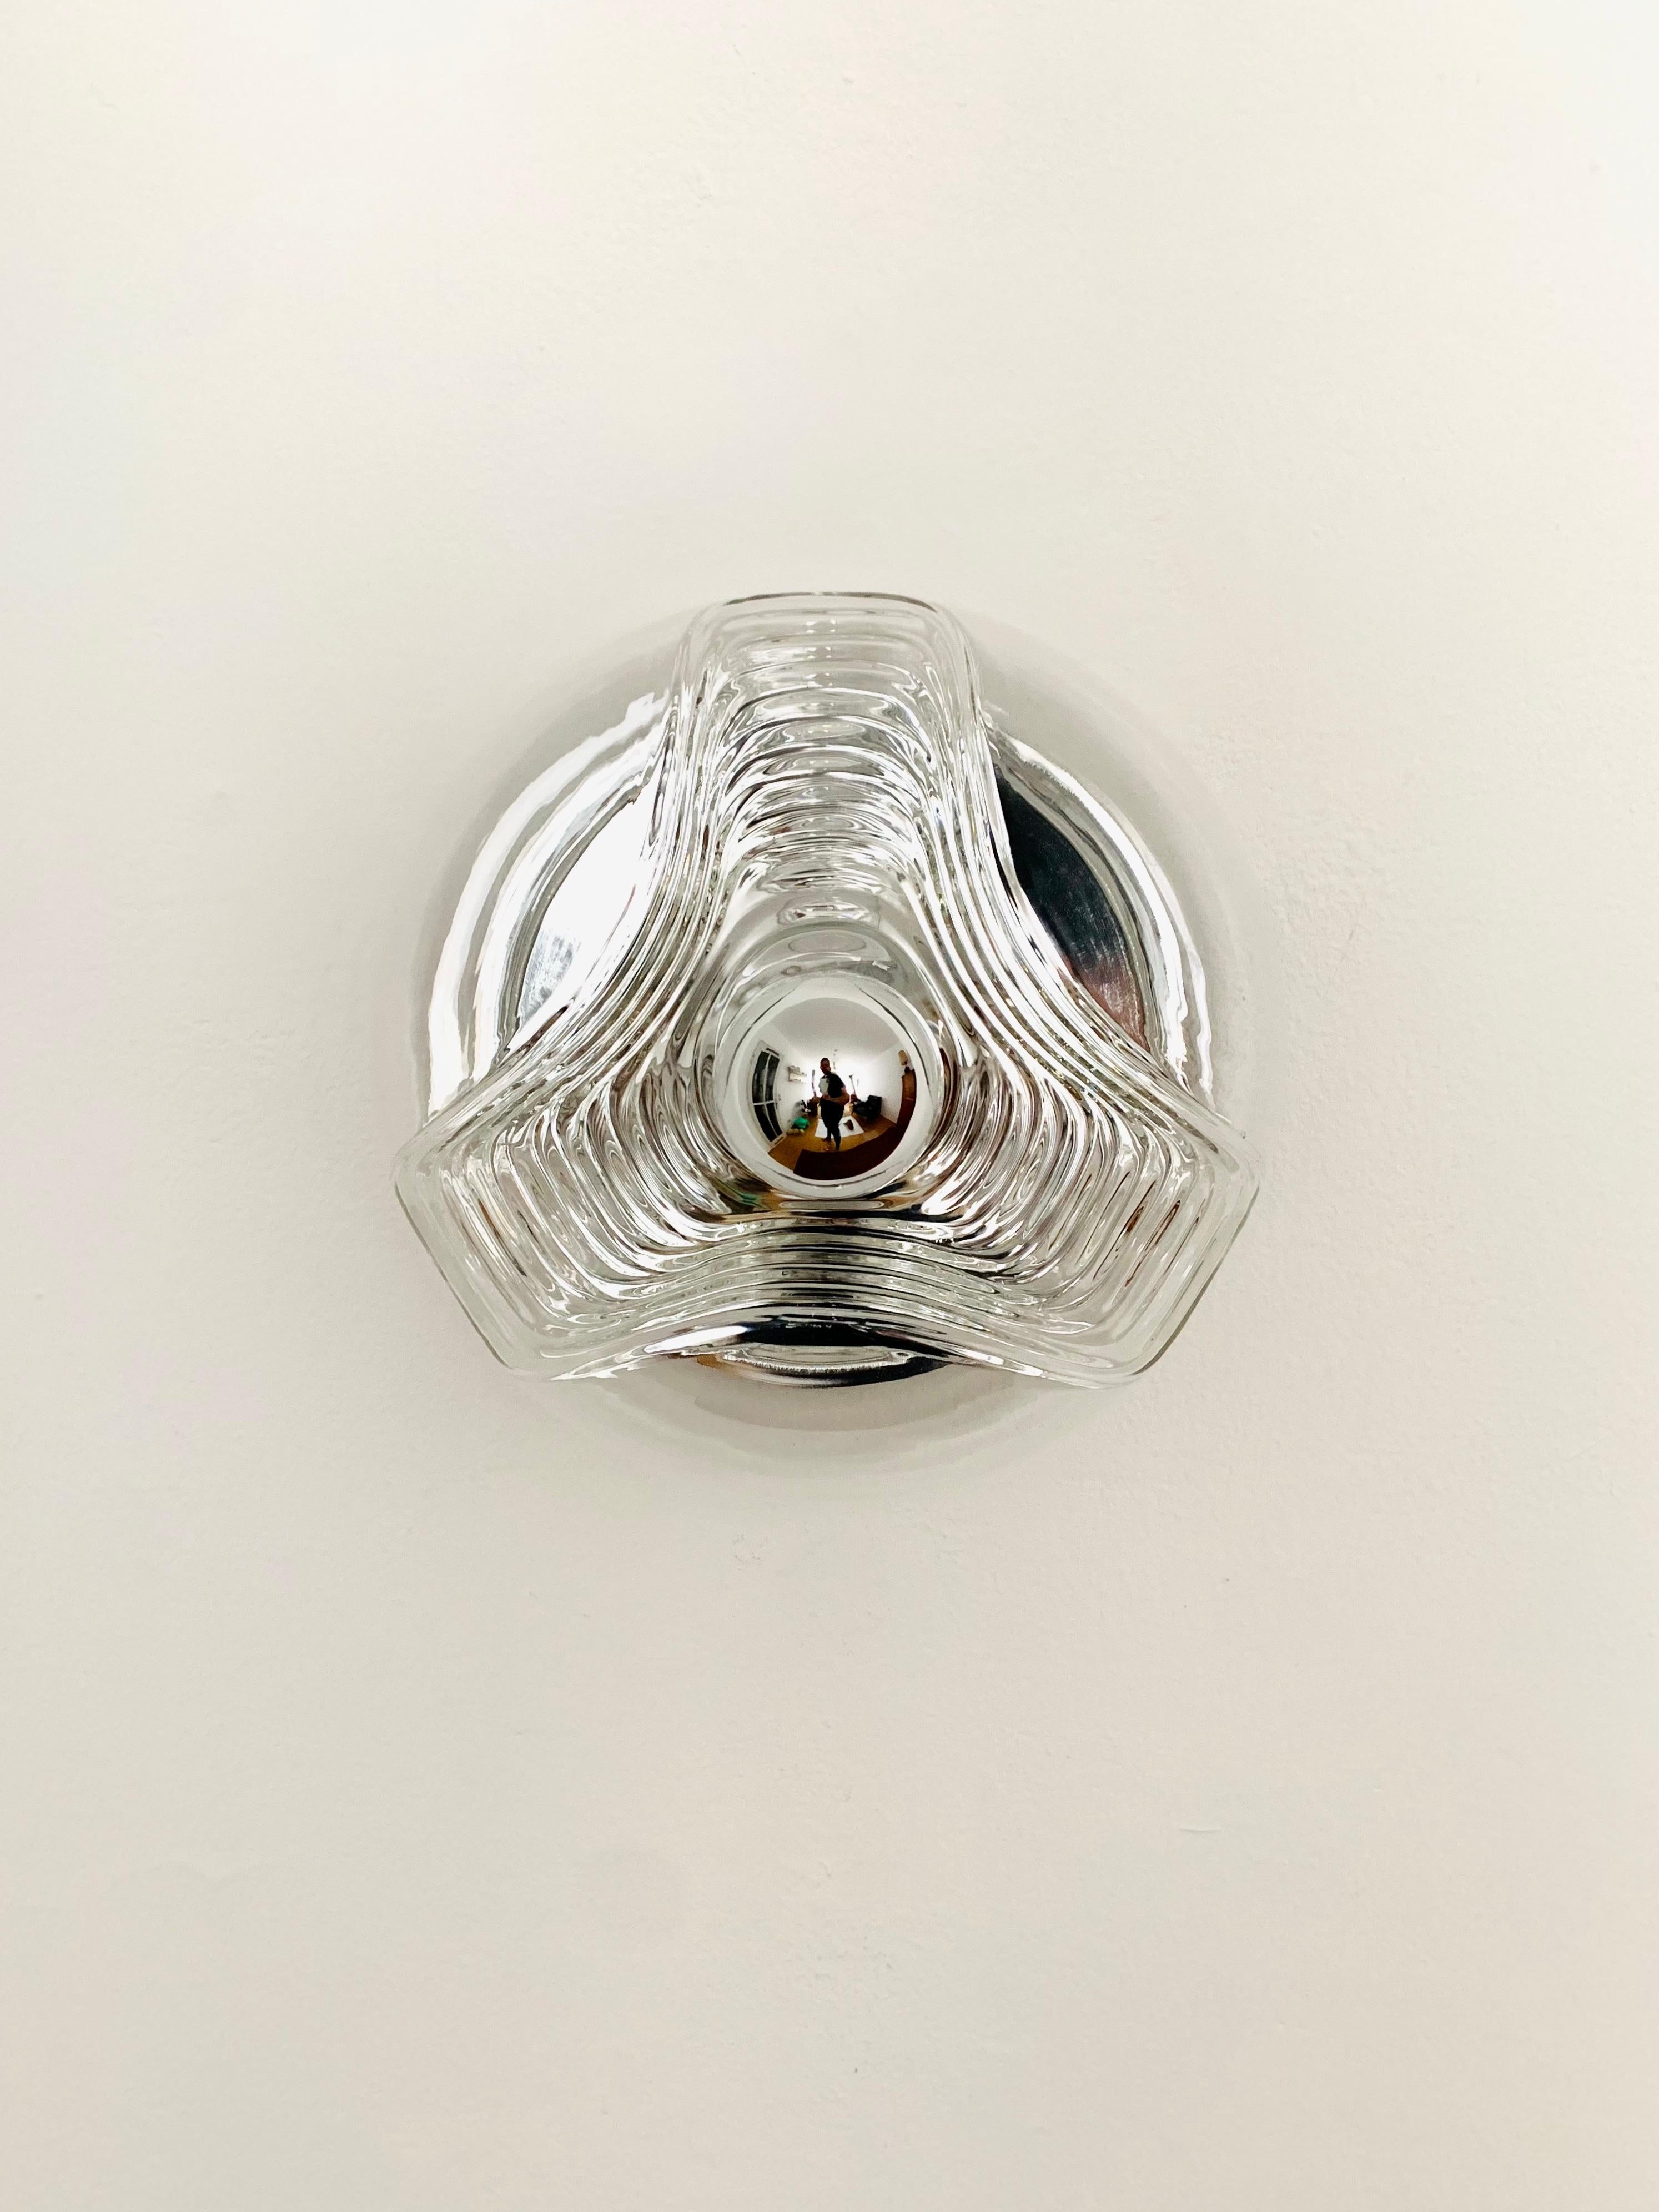 Exceptionally beautiful and large wall lamp or ceiling lamp from the 1960s.
The design and materials create a fantastic play of light in the room.
Very high-quality workmanship and an enrichment for every home.

Manufacturer: Peill and